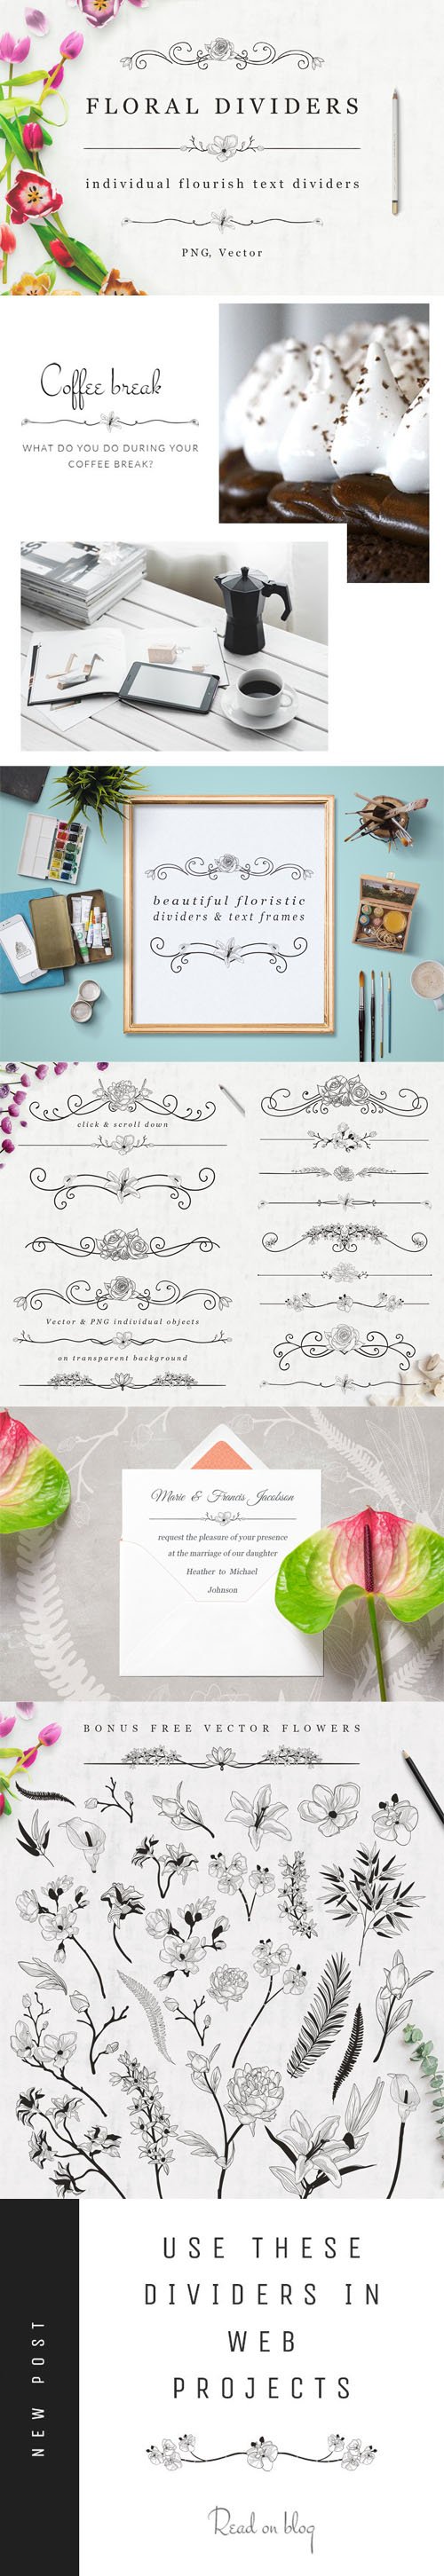 Floral Dividers - Individual Flourish Text Dividers [EPS/PNG]